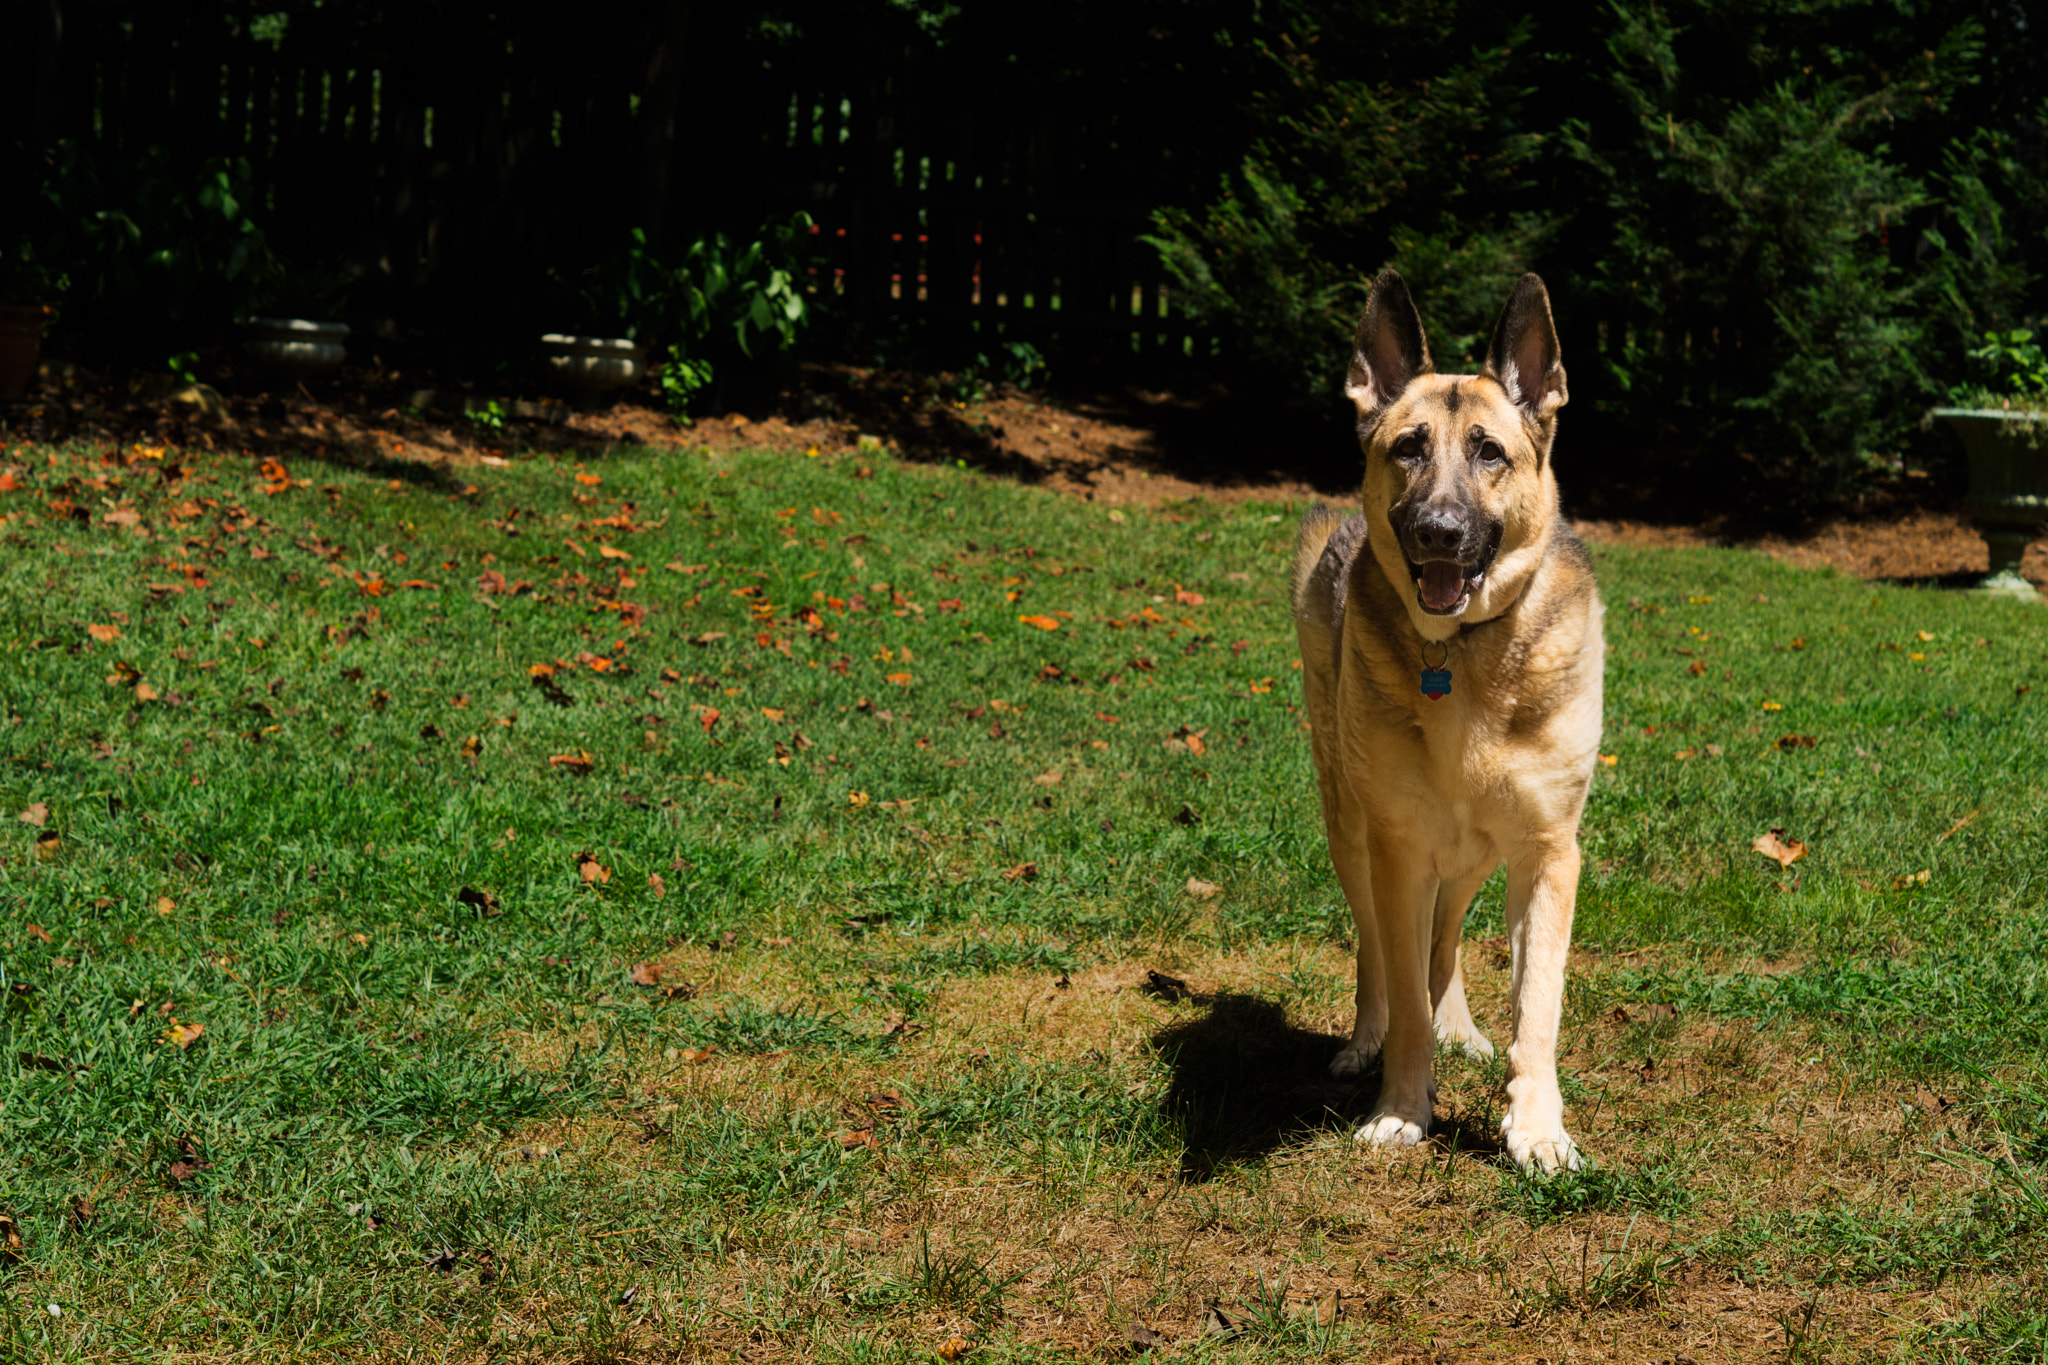 Sony ILCA-77M2 + Sony DT 50mm F1.8 SAM sample photo. Cloud, the handsome german shepherd photography